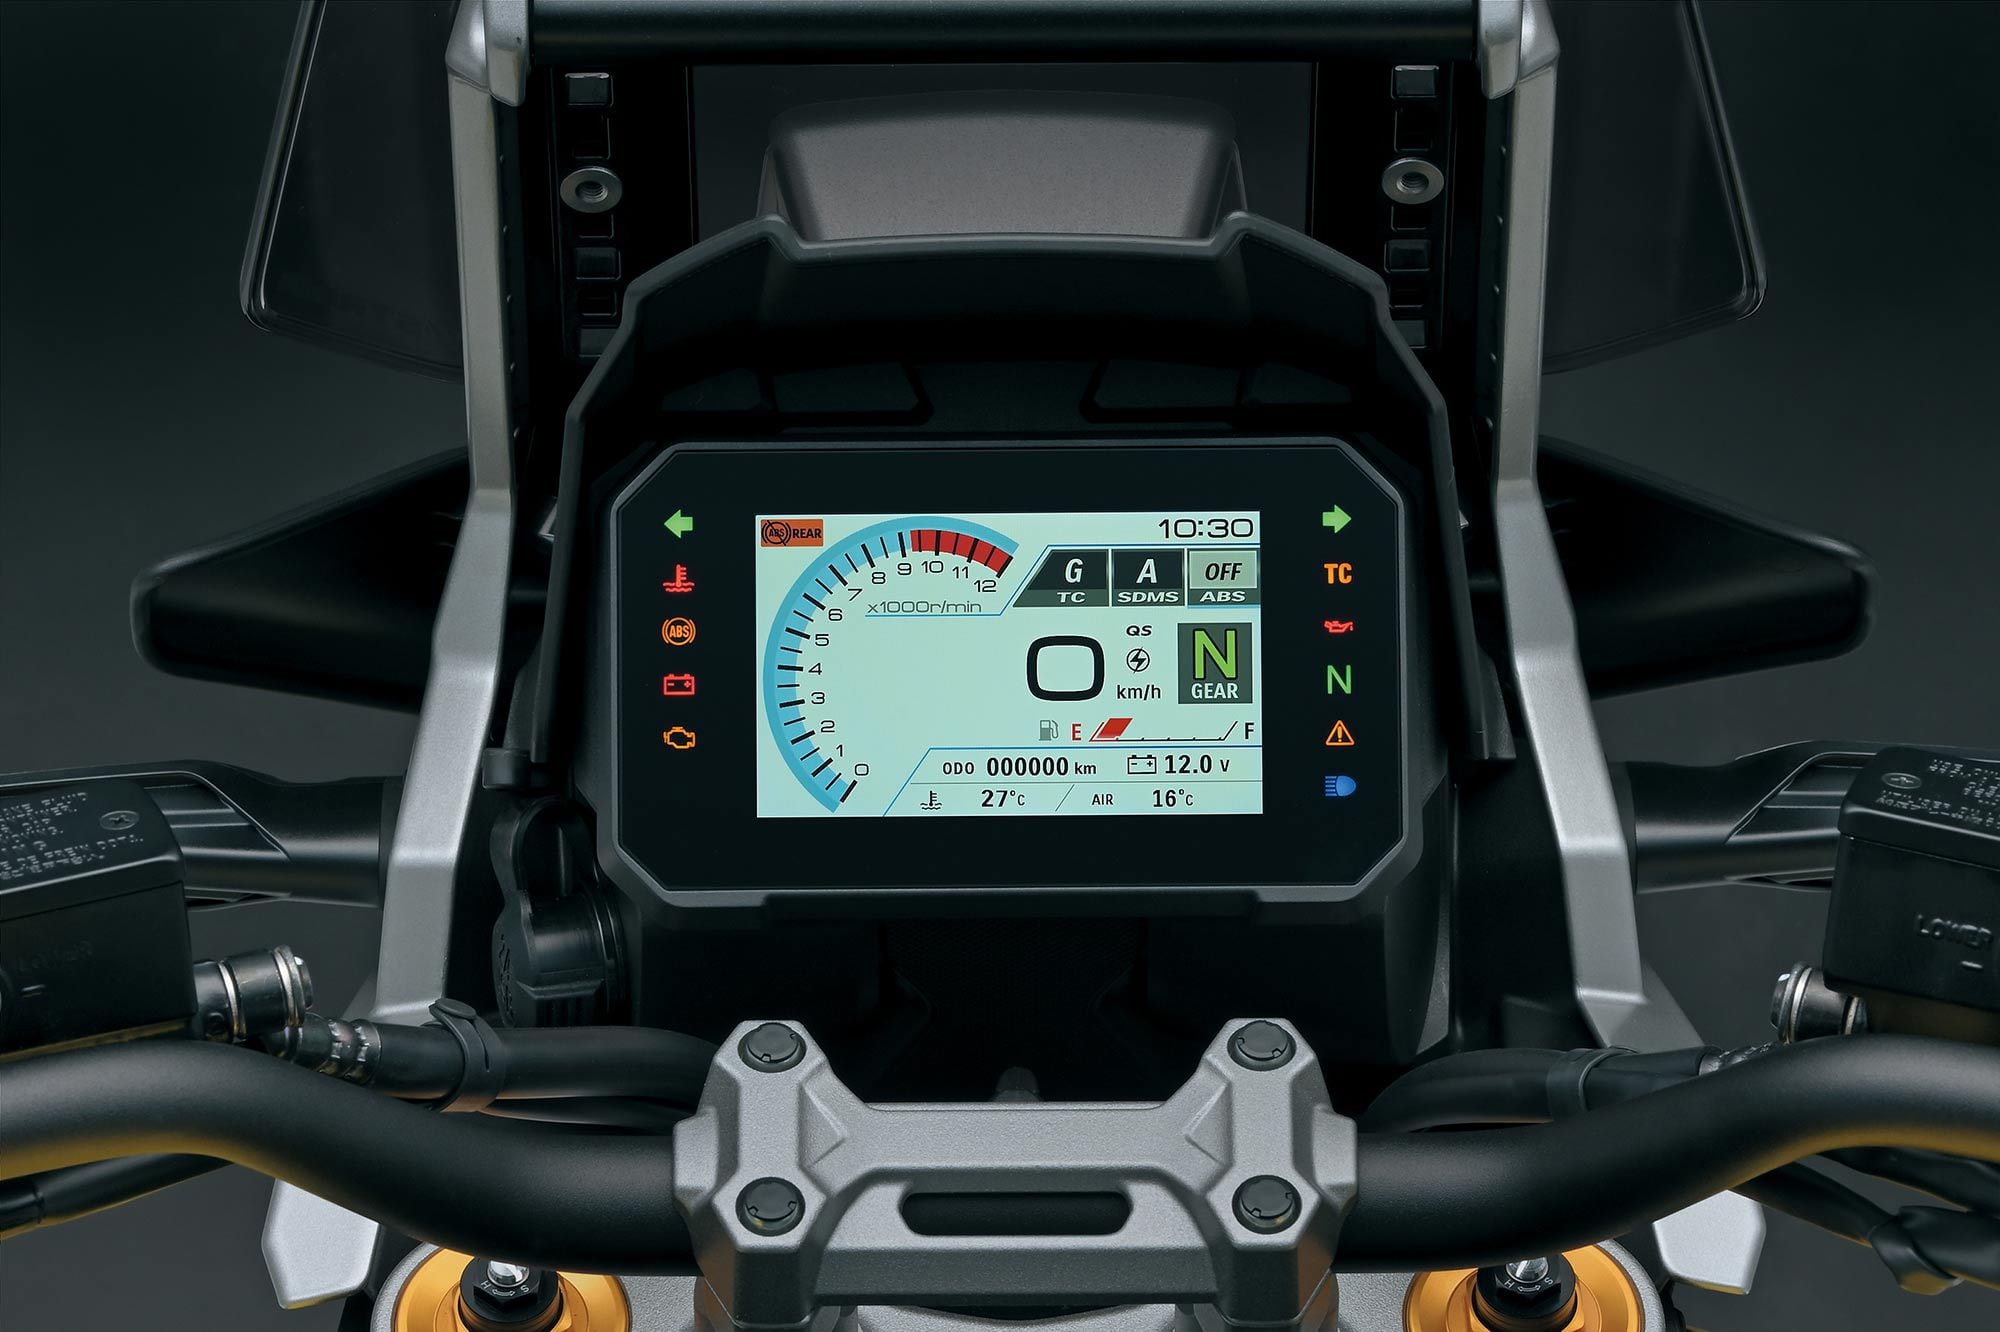 A new 5-inch TFT instrument panel gives riders all the info they need.